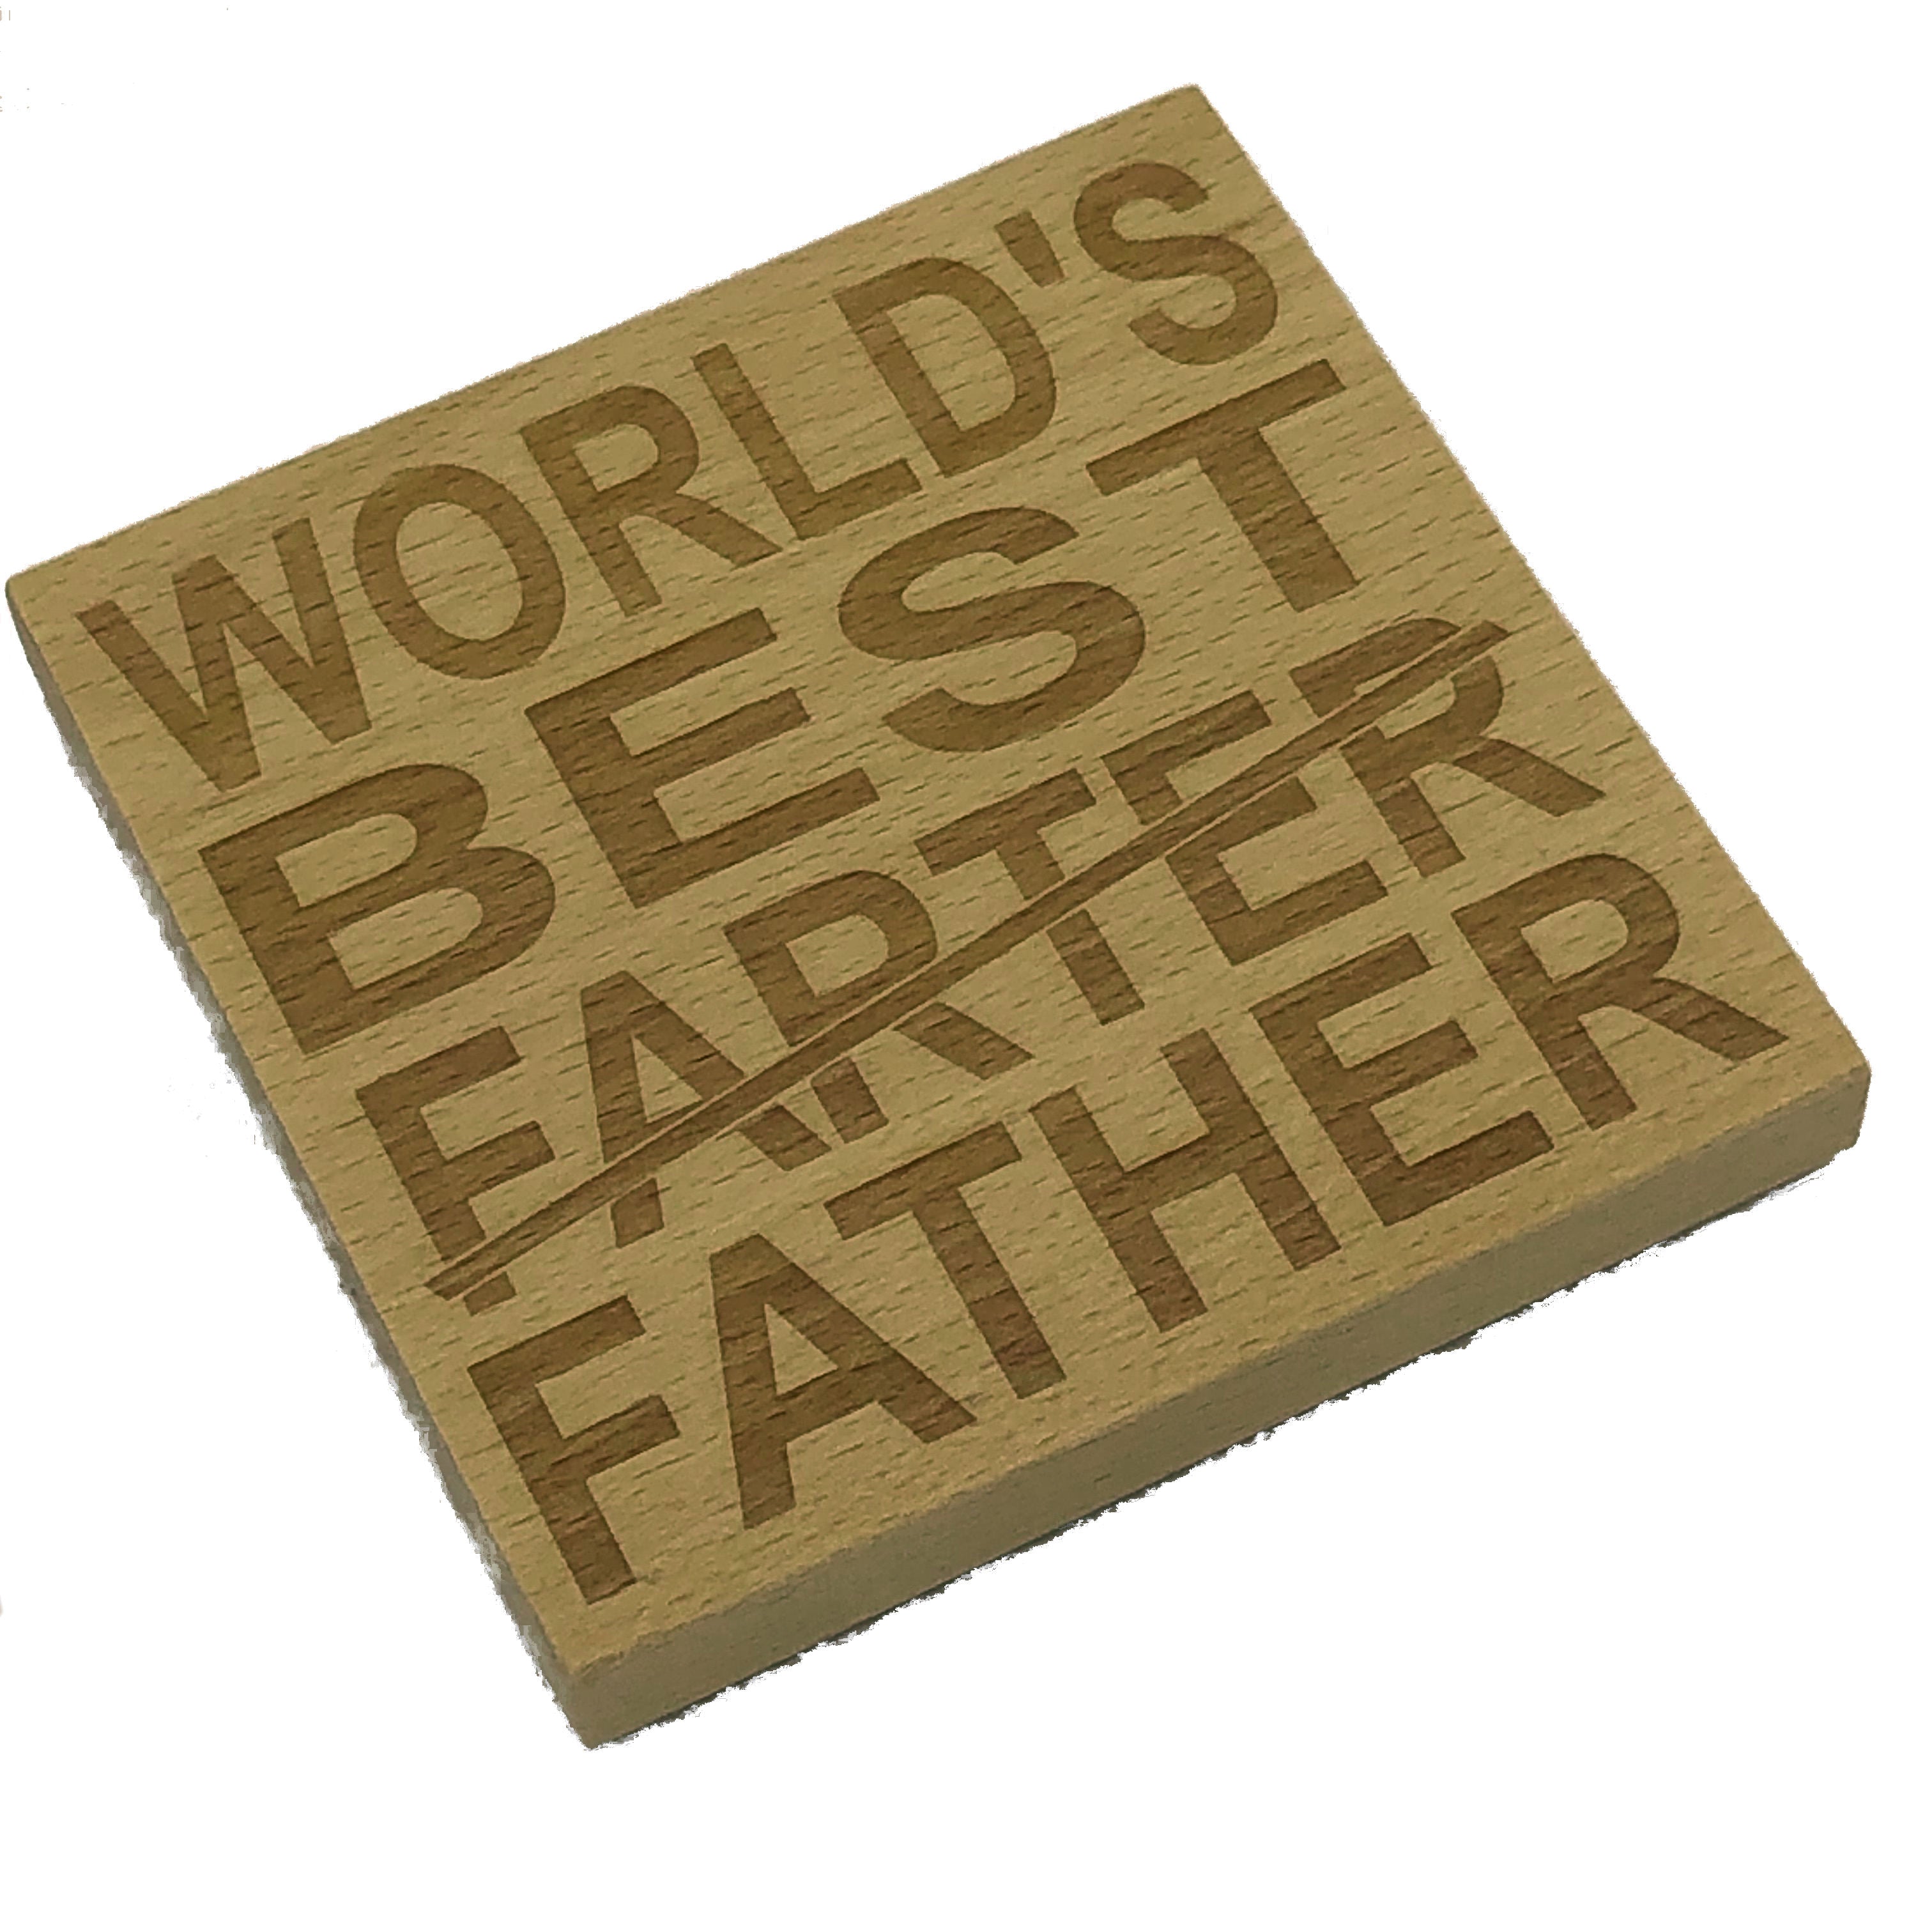 Wooden coaster - world's best farter father